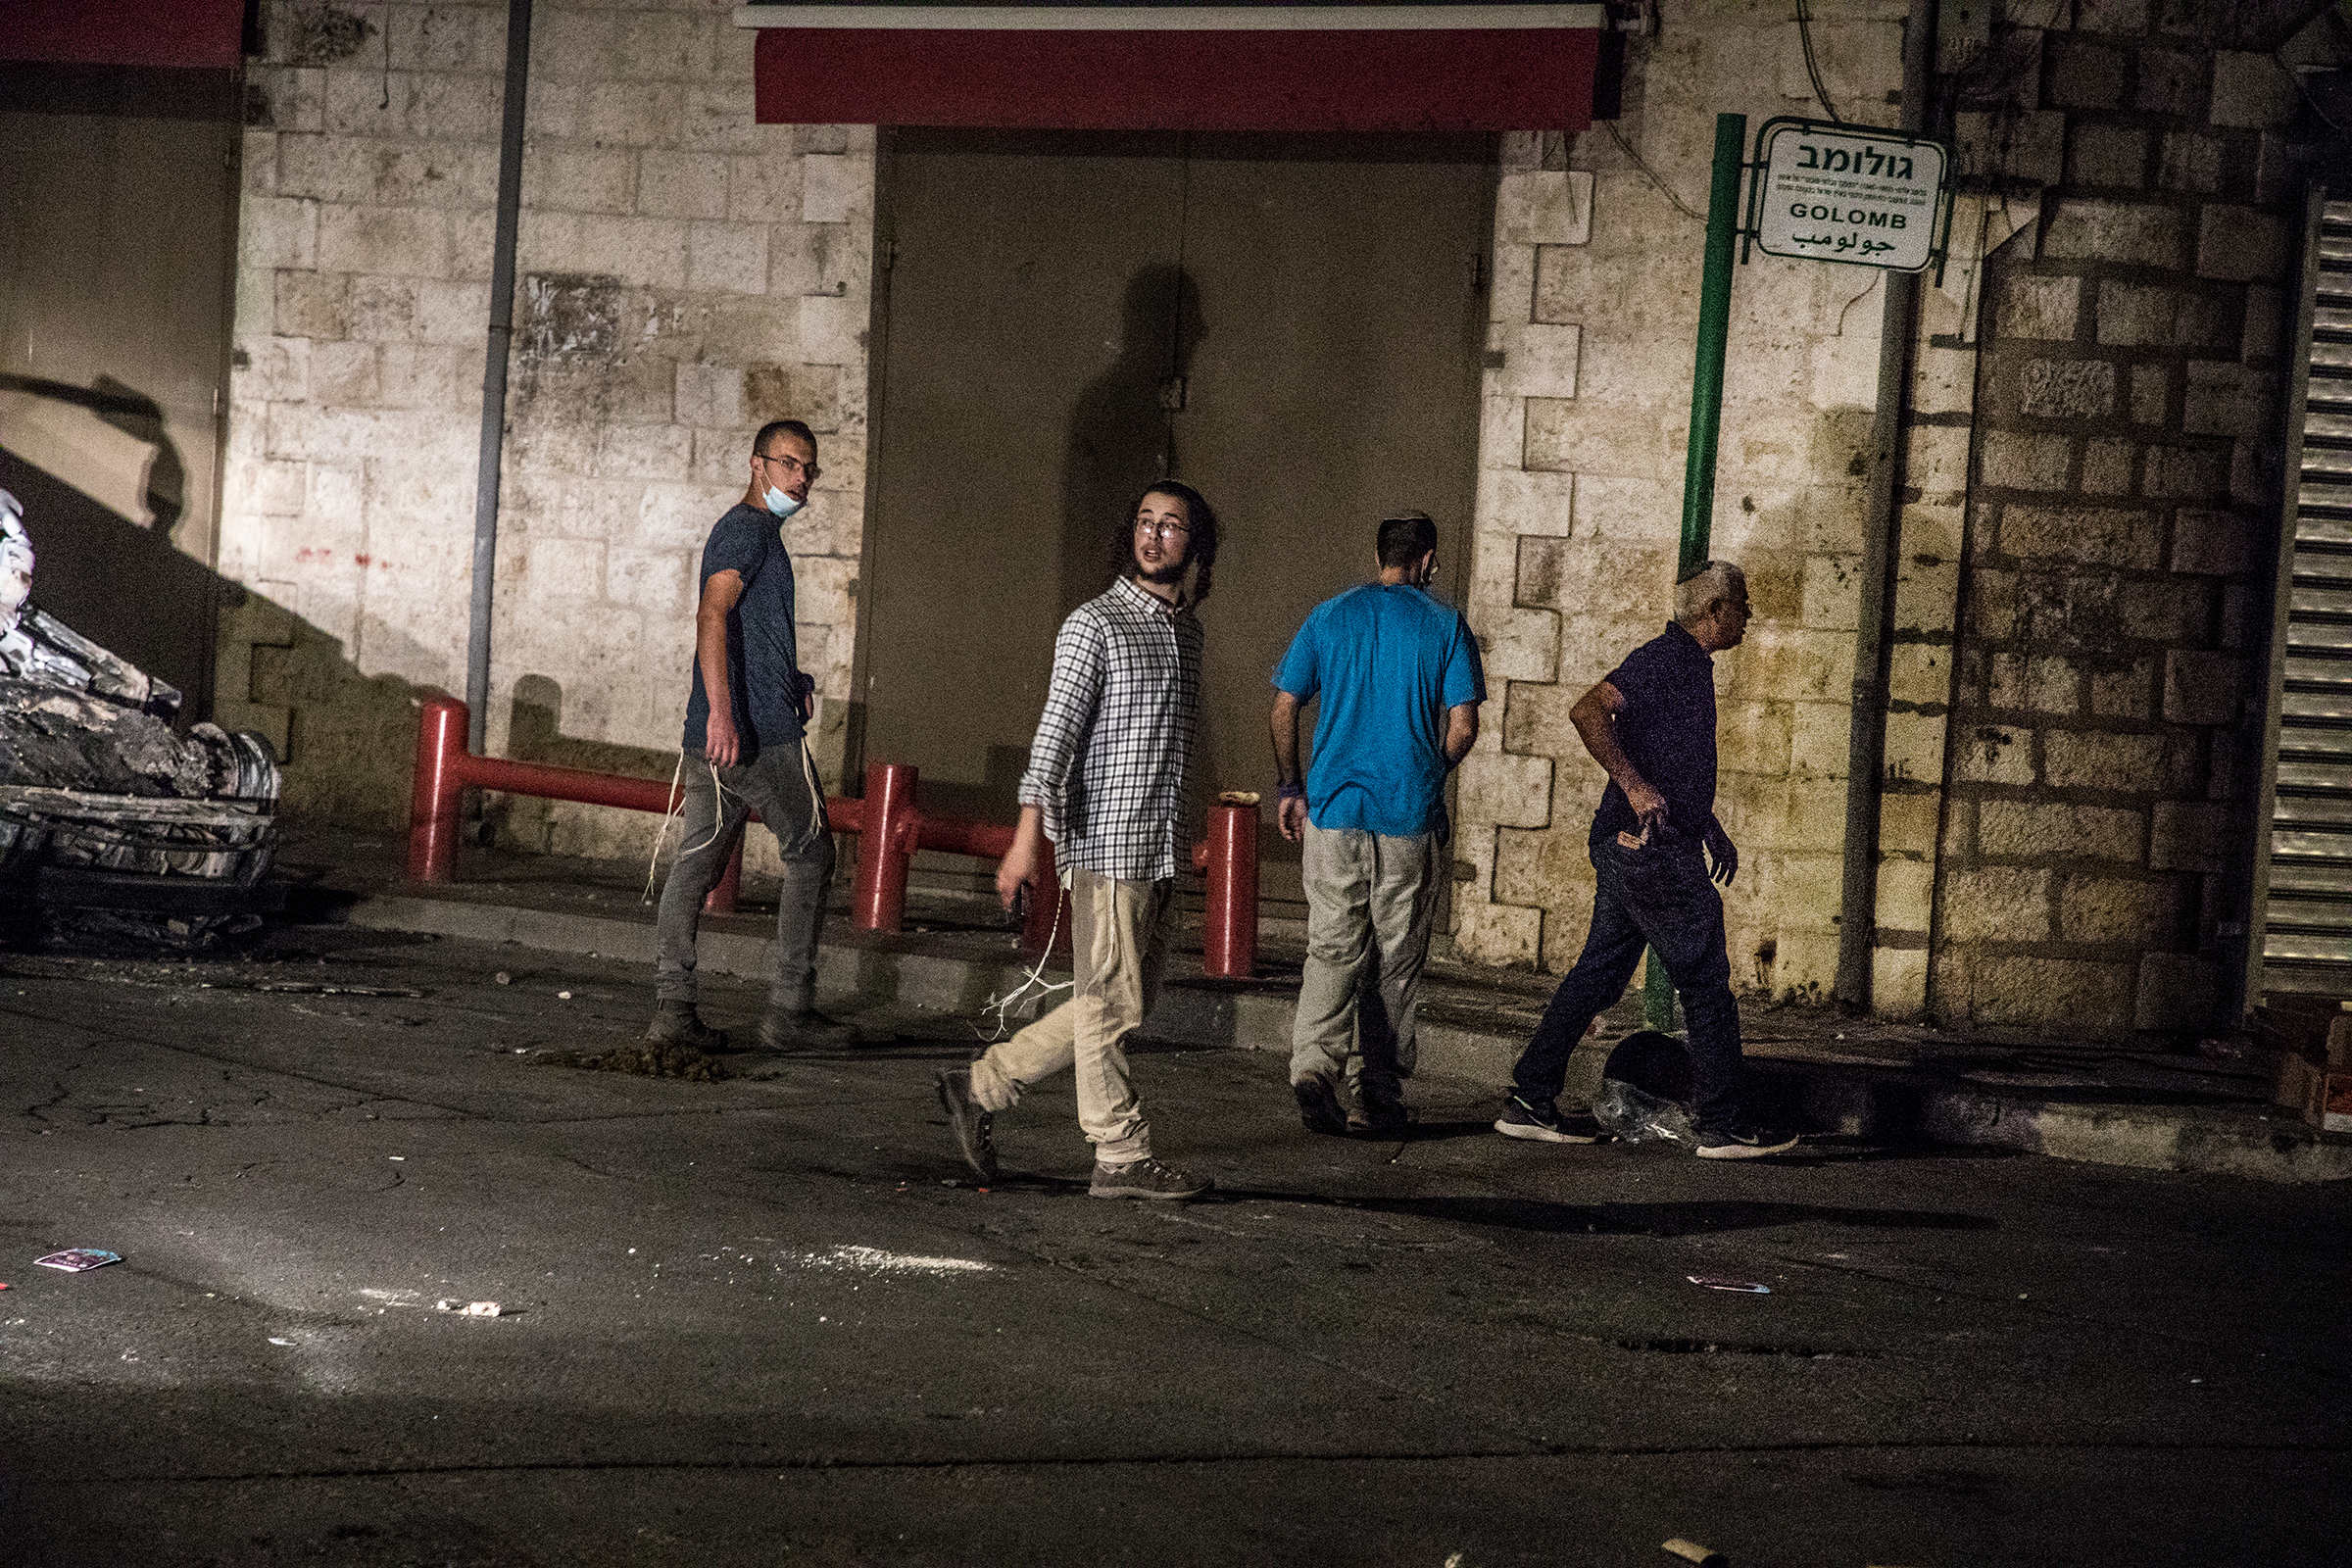 Young Jewish men from a group comprising settlers and extreme right-wing activists, mostly armed, try to approach the downtown mosque in the mixed city of Lod, Israel, on May 12, 2021.